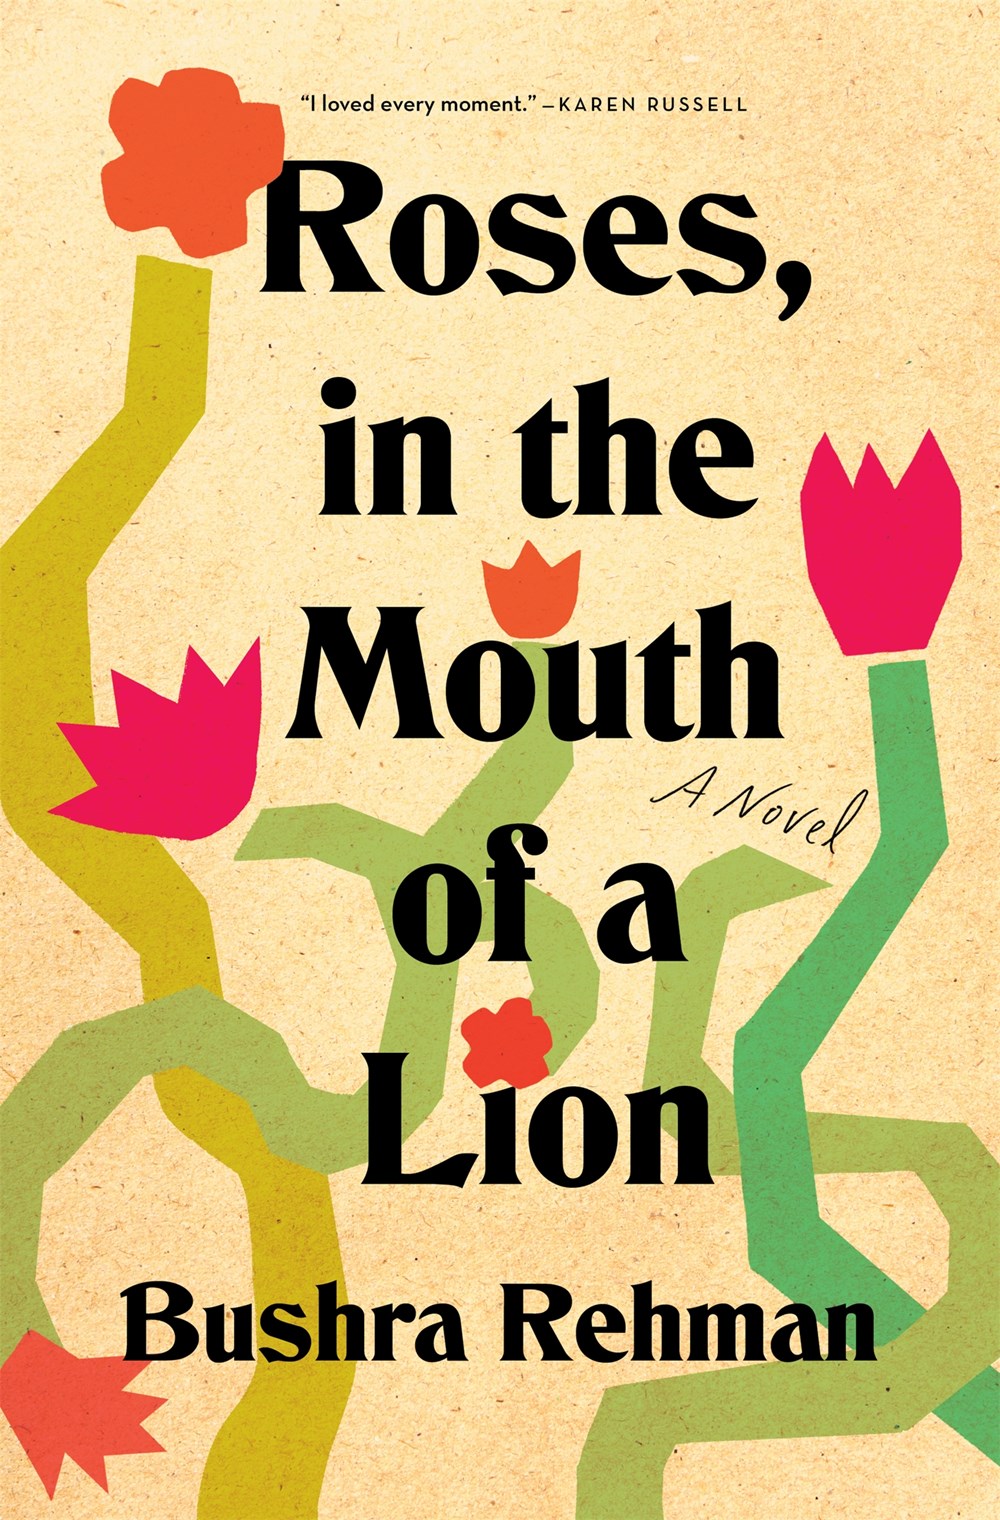 Image of "Roses, in the Mouth of a Lion"